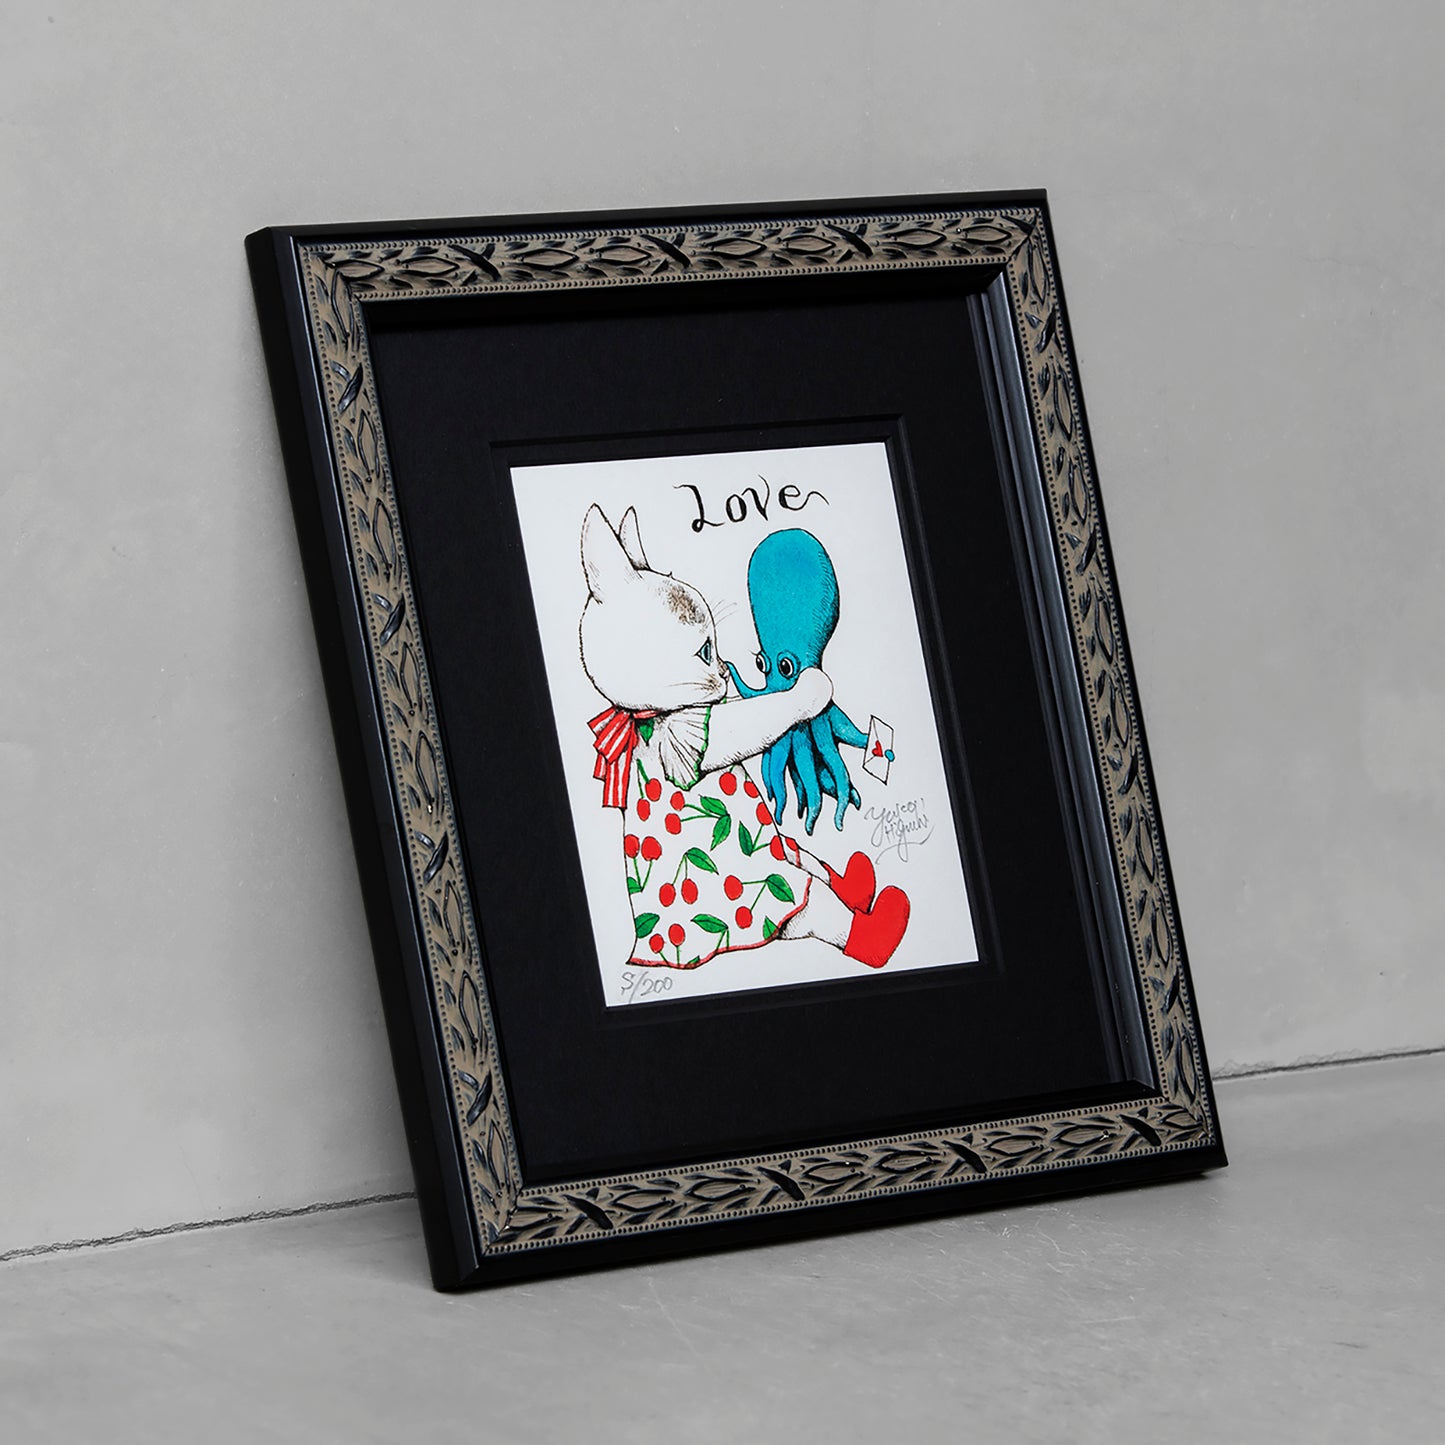 [Framed] Reproduced painting LOVE